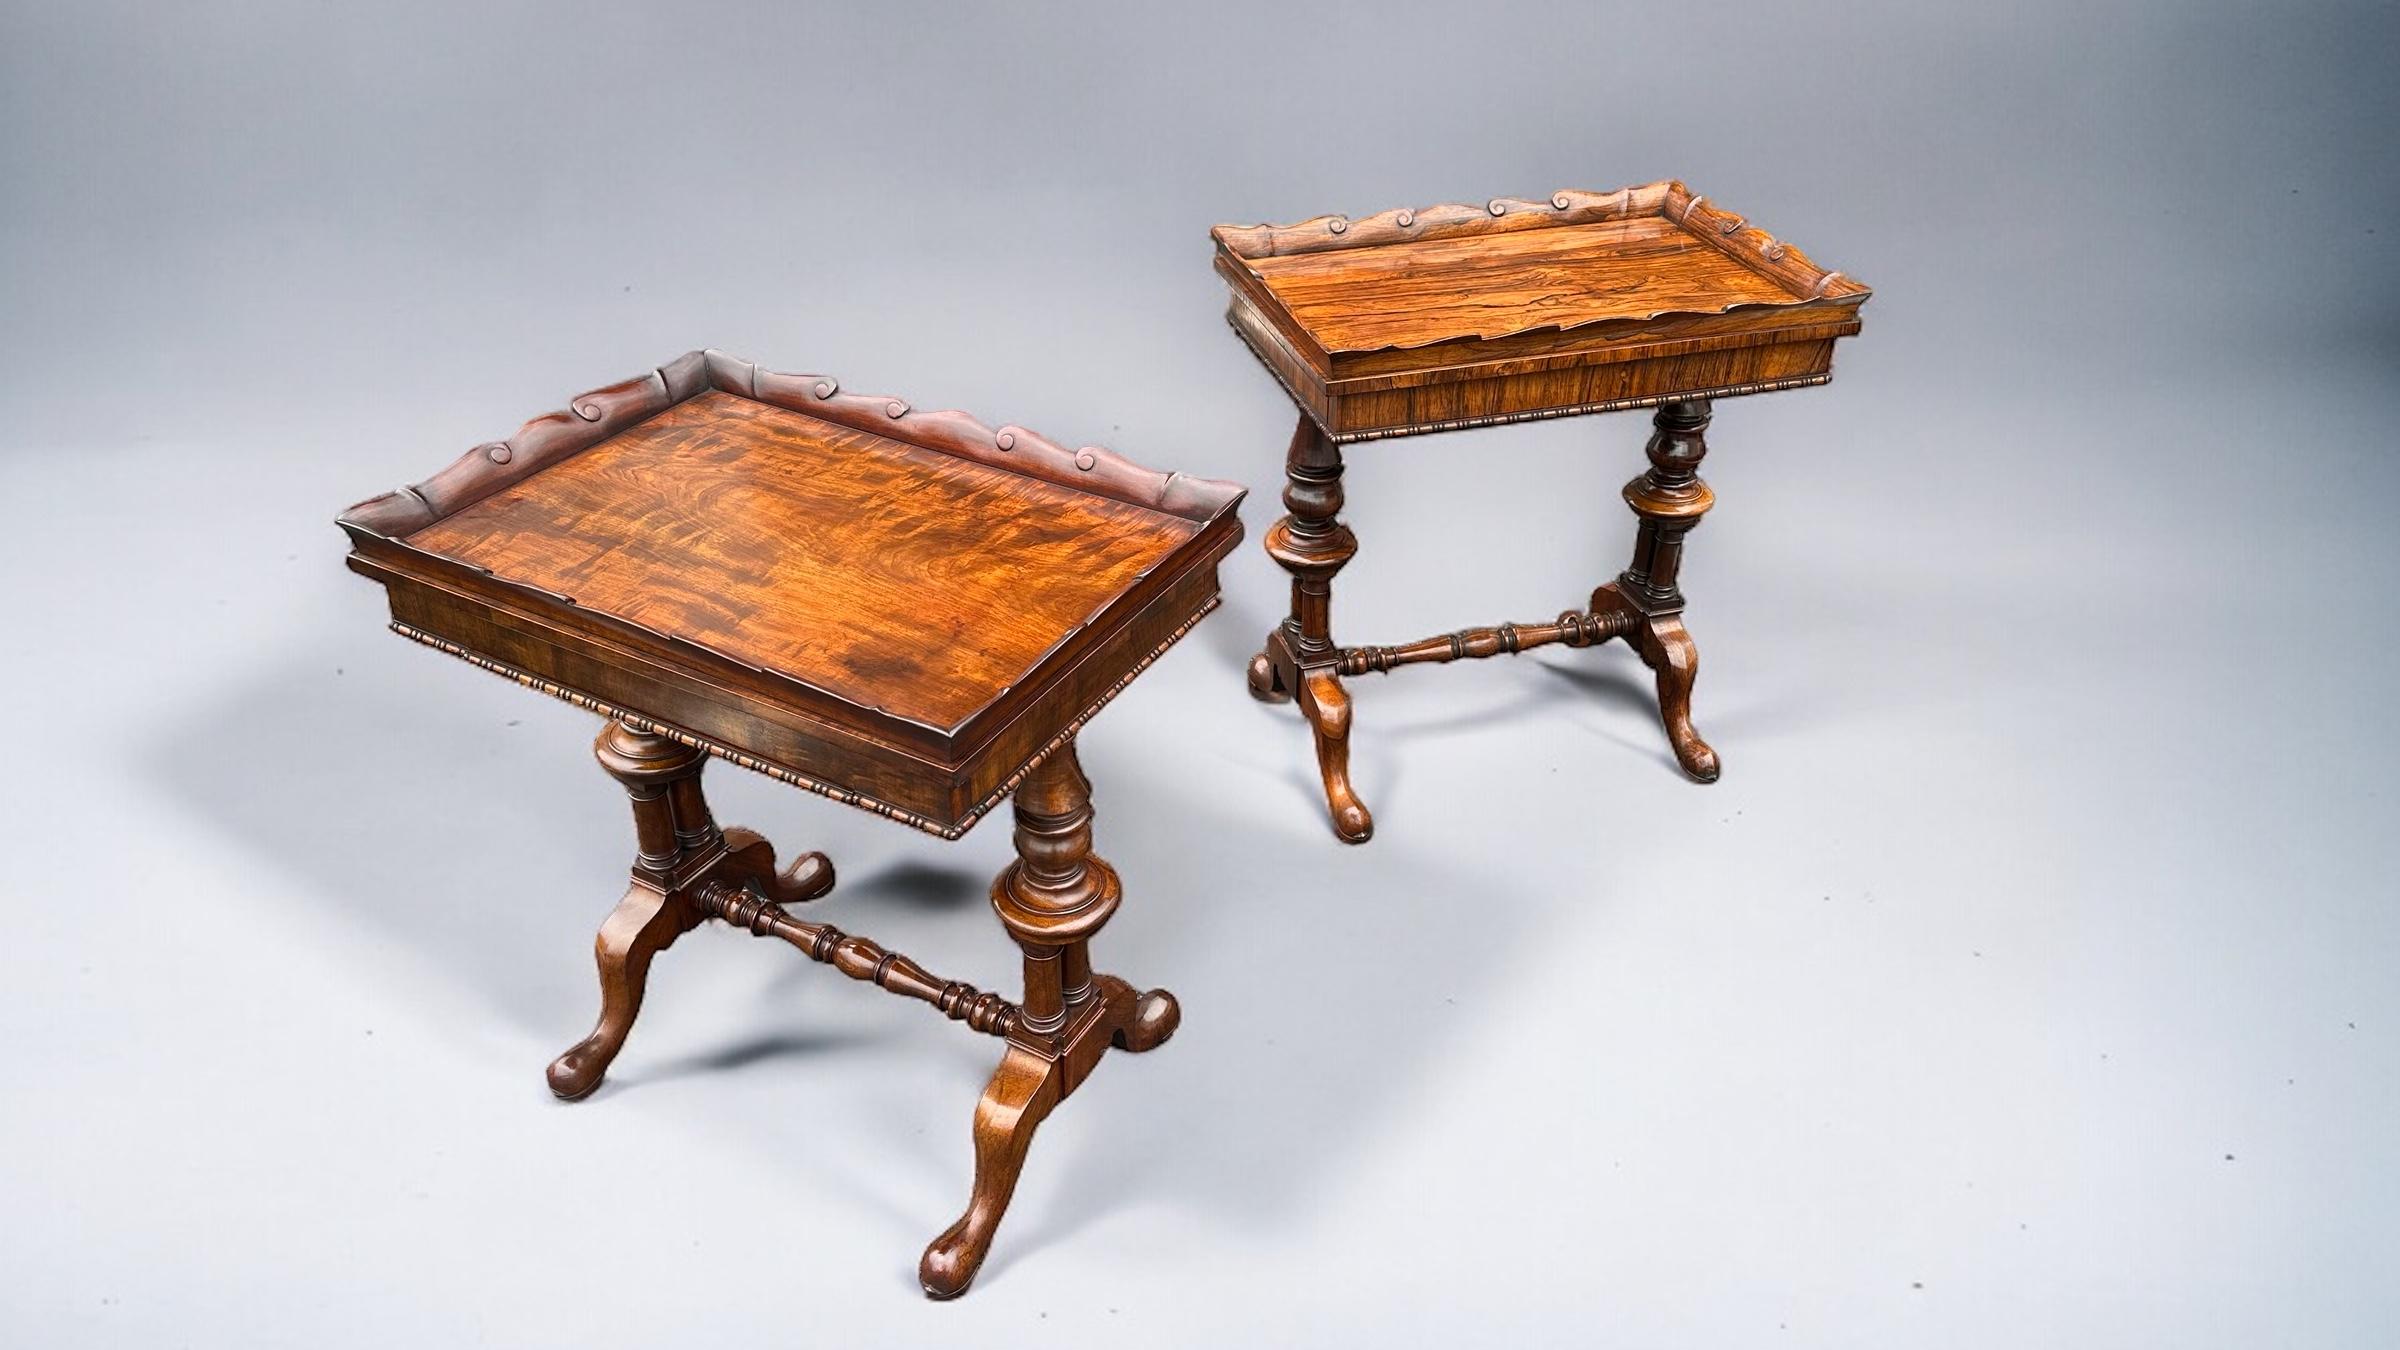 A superb matched pair of Gillows rosewood - mahogany work or end tables.
One table in rosewood the other mahogany.
The rosewood table with solid rosewood turned twin column supports and Georgian style solid rosewood cabriole legs with carved spade